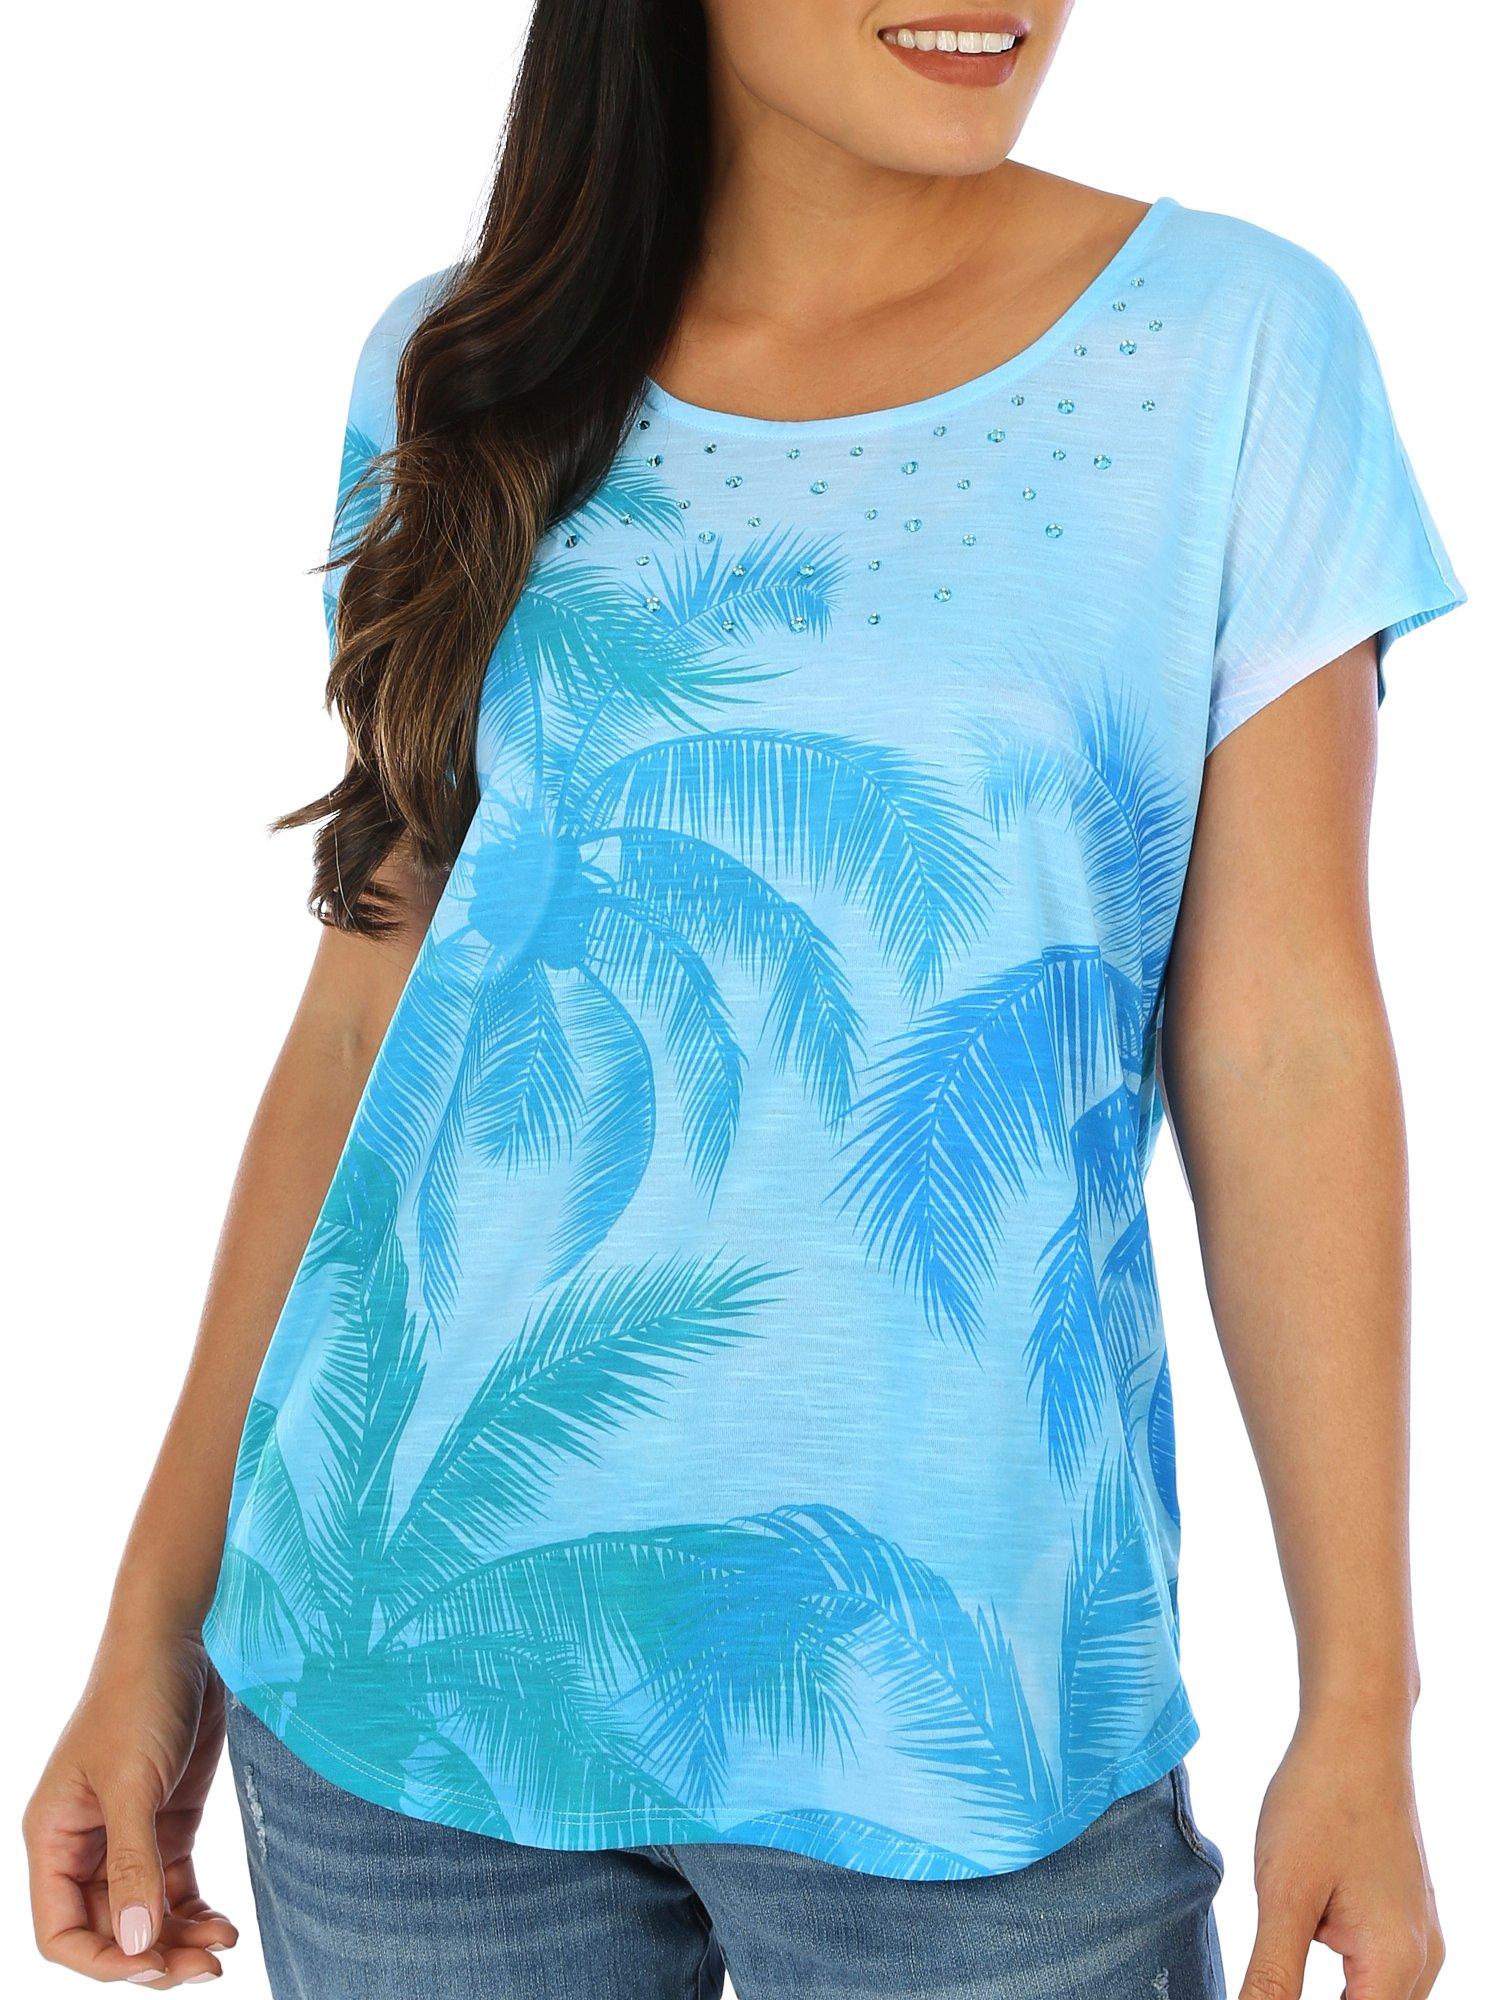 Coral Bay Womens Palms Print Embellished Short Sleeve Top